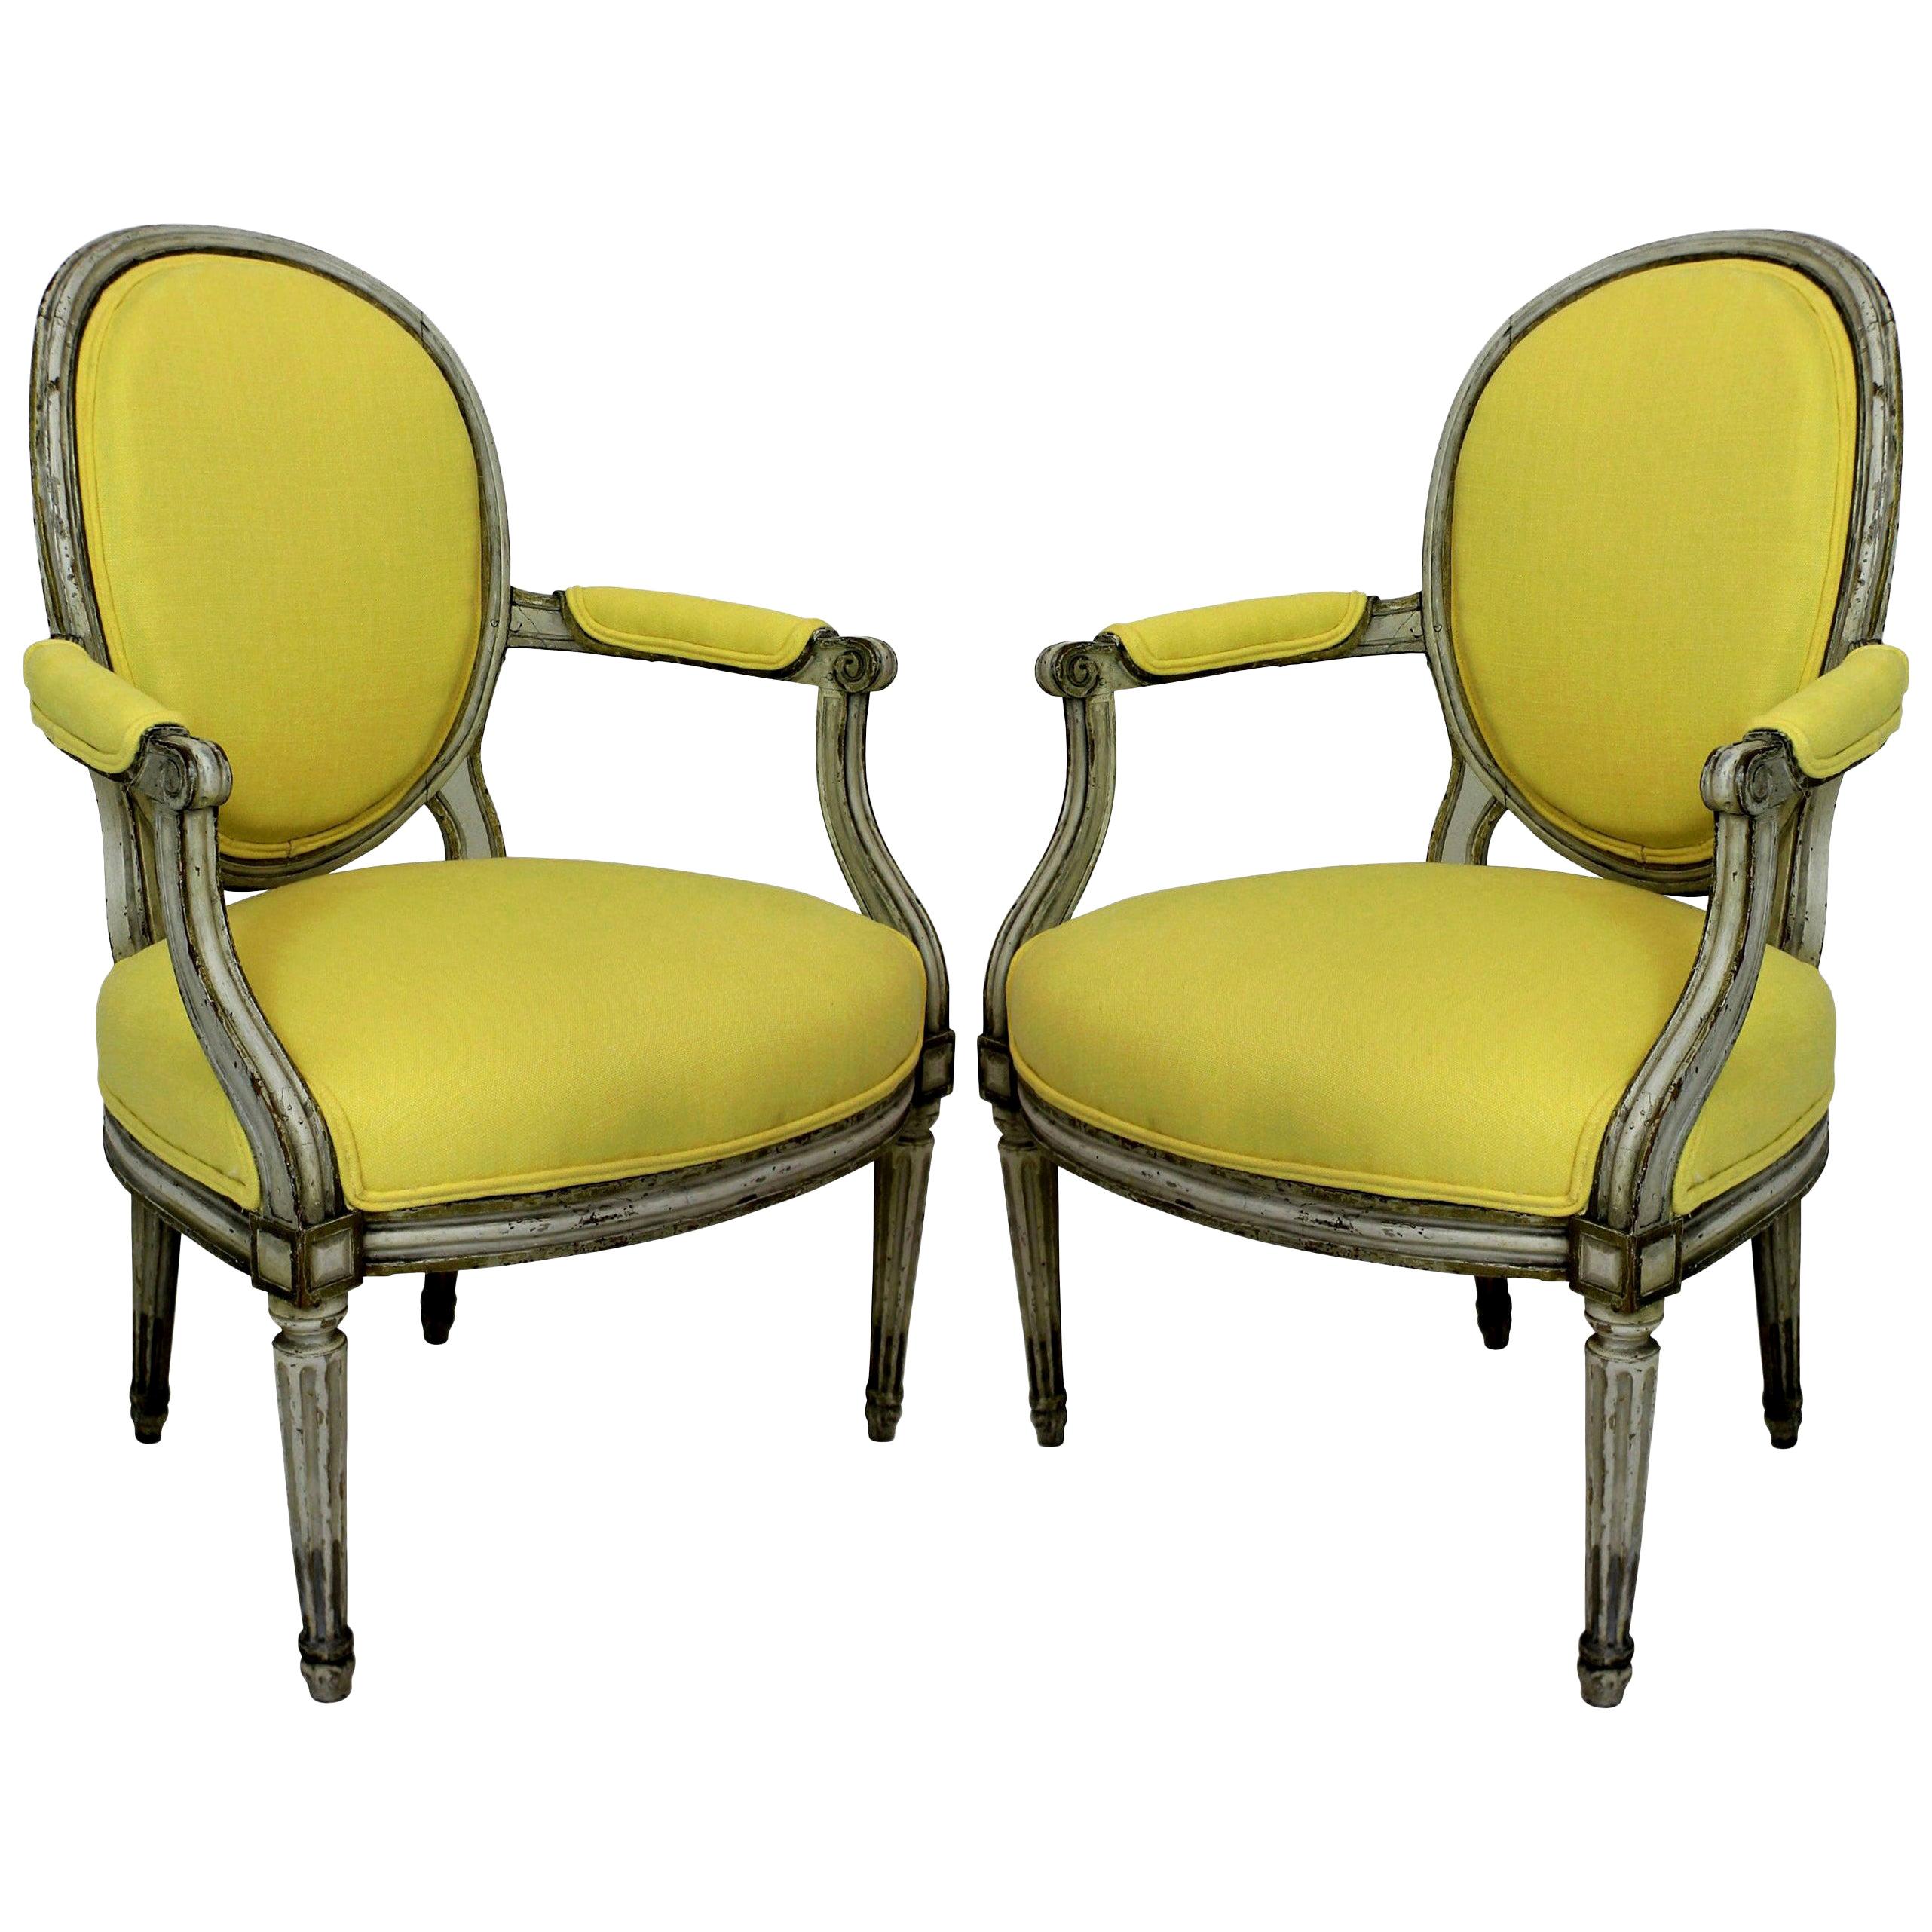 Pair of 18th Century Painted Armchairs